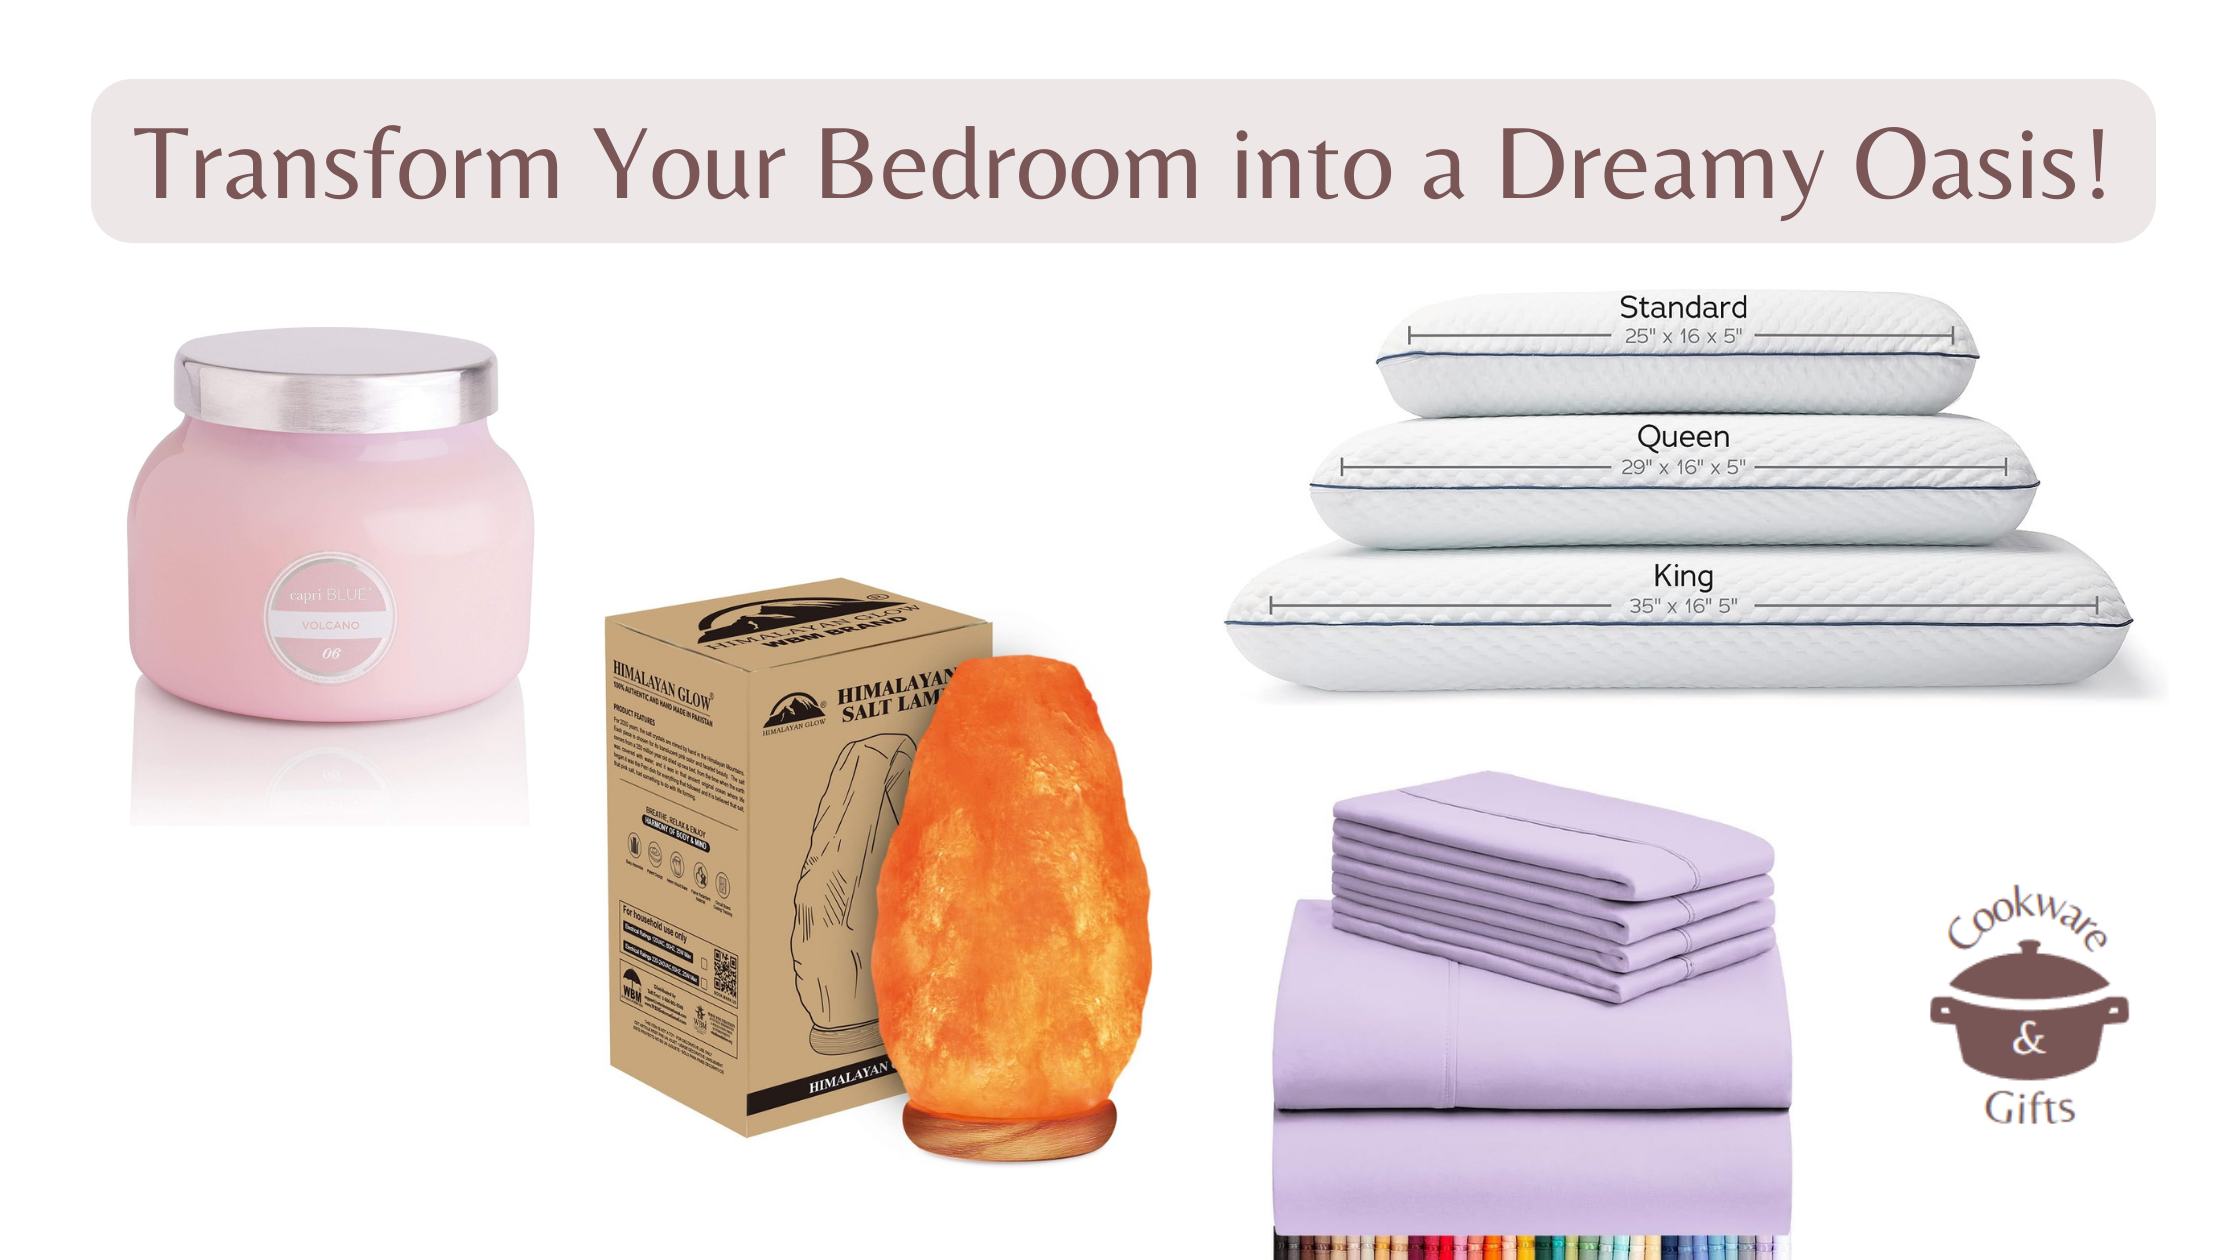 Transform Your Bedroom into a Dreamy Oasis with these 12 Amazing Products